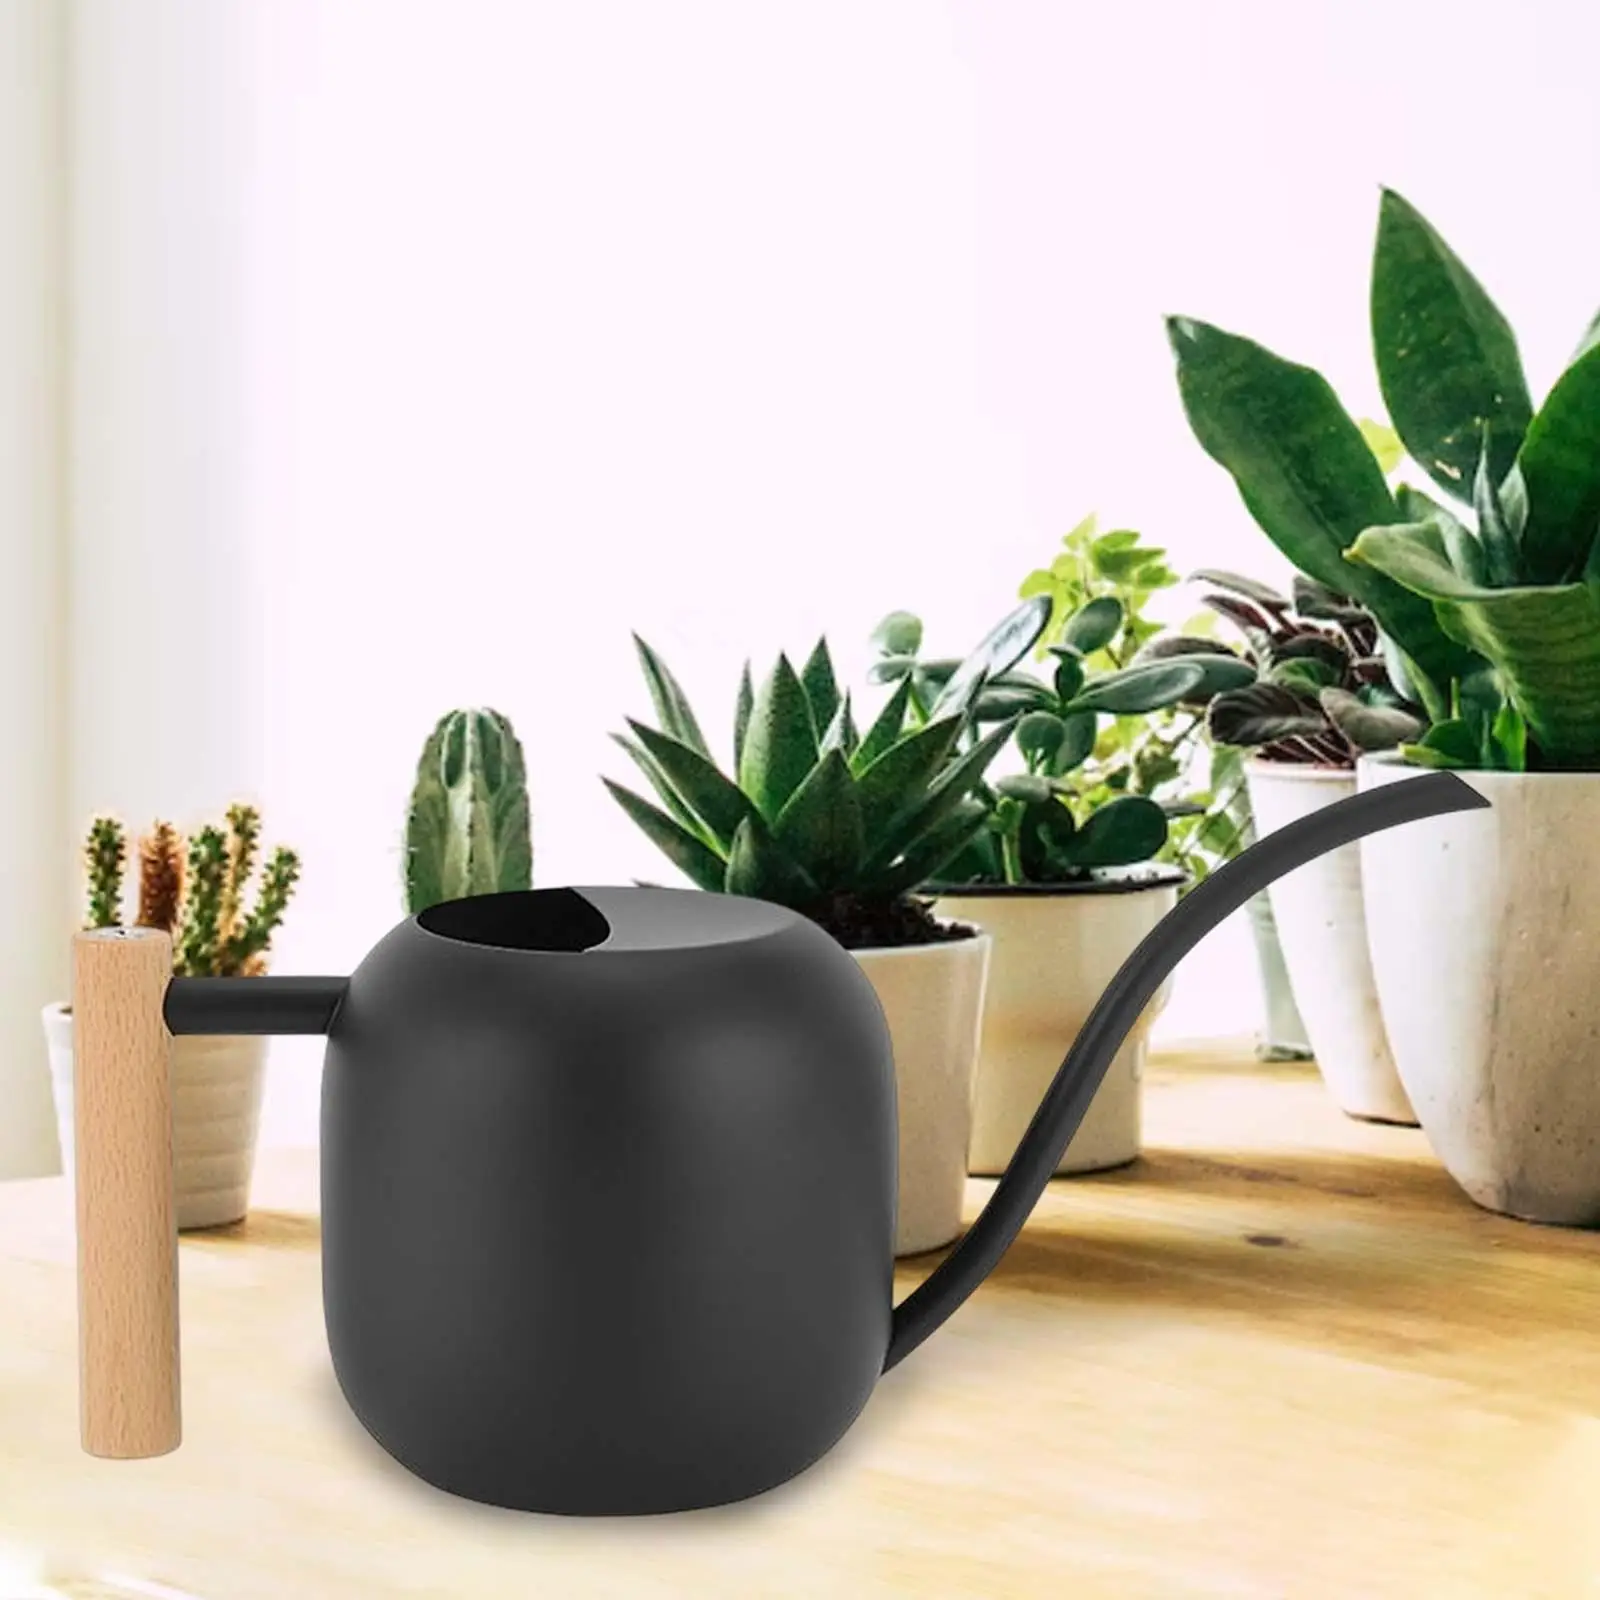 Stainless Steel Mini Watering Can with Long Mouth Watering Flower Kettle 1.2L Watering Pot for Home Shower Yard Outdoor Decor